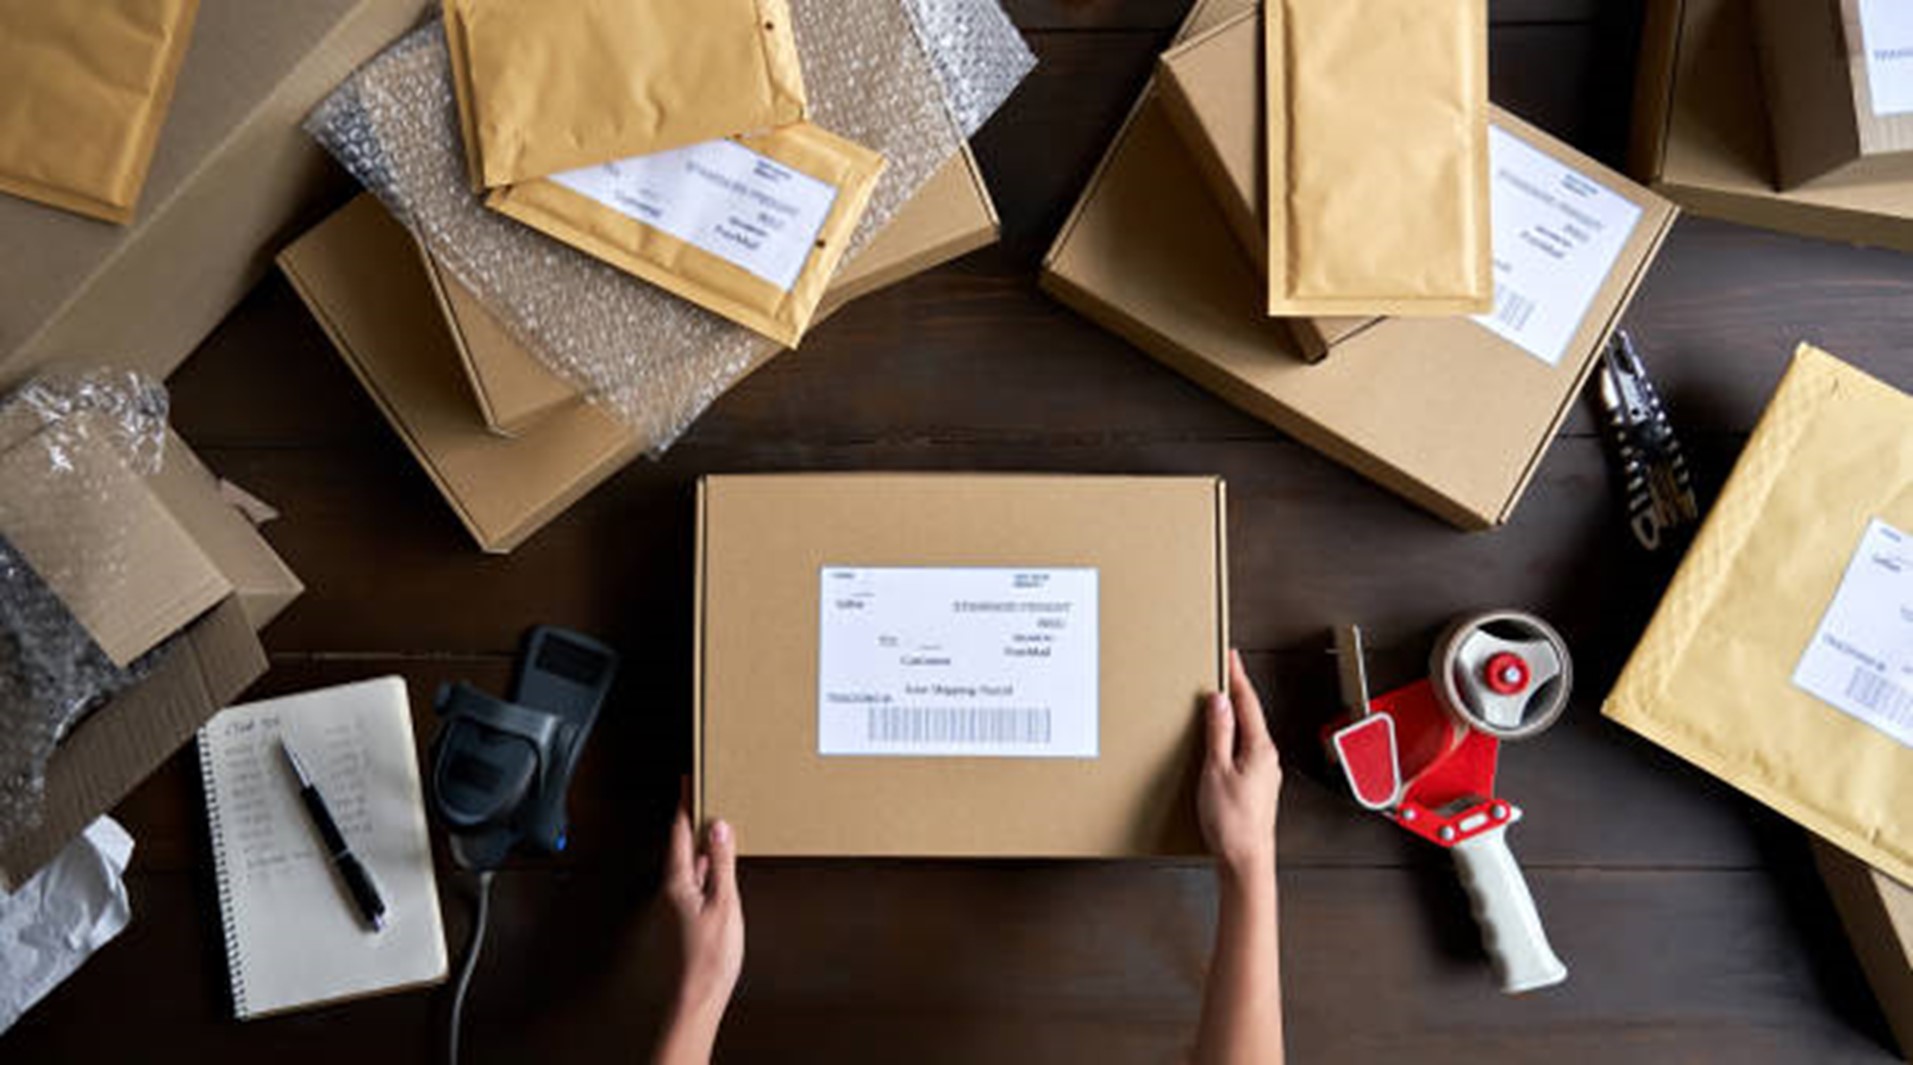 E-COMMERCE AND PACKAGING – A CHANGING ECONOMIC ENVIRONMENT